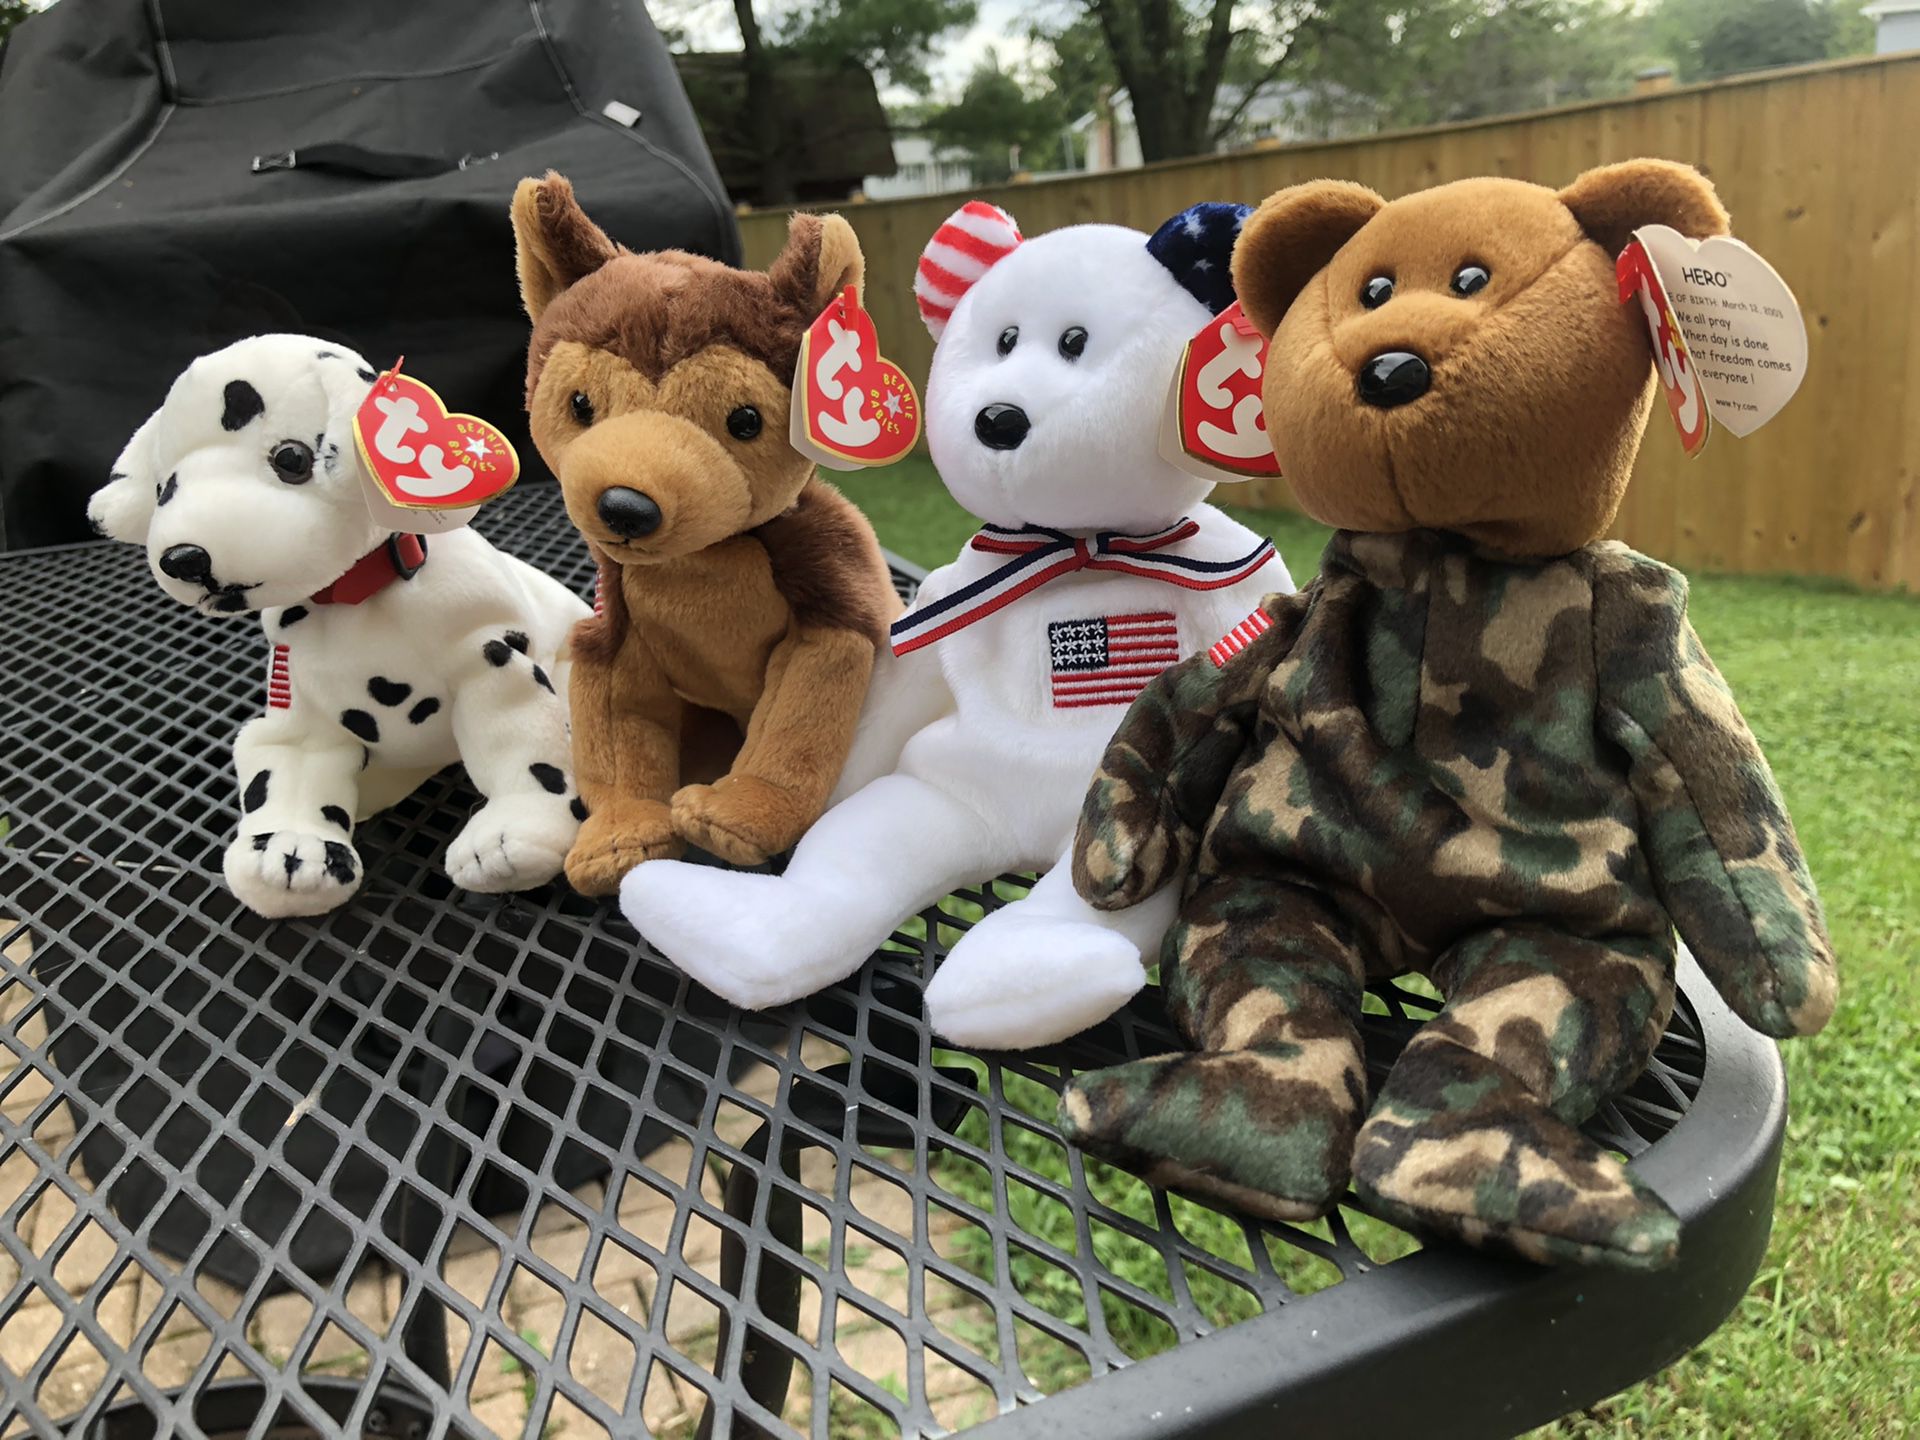 Collection of beanie babies